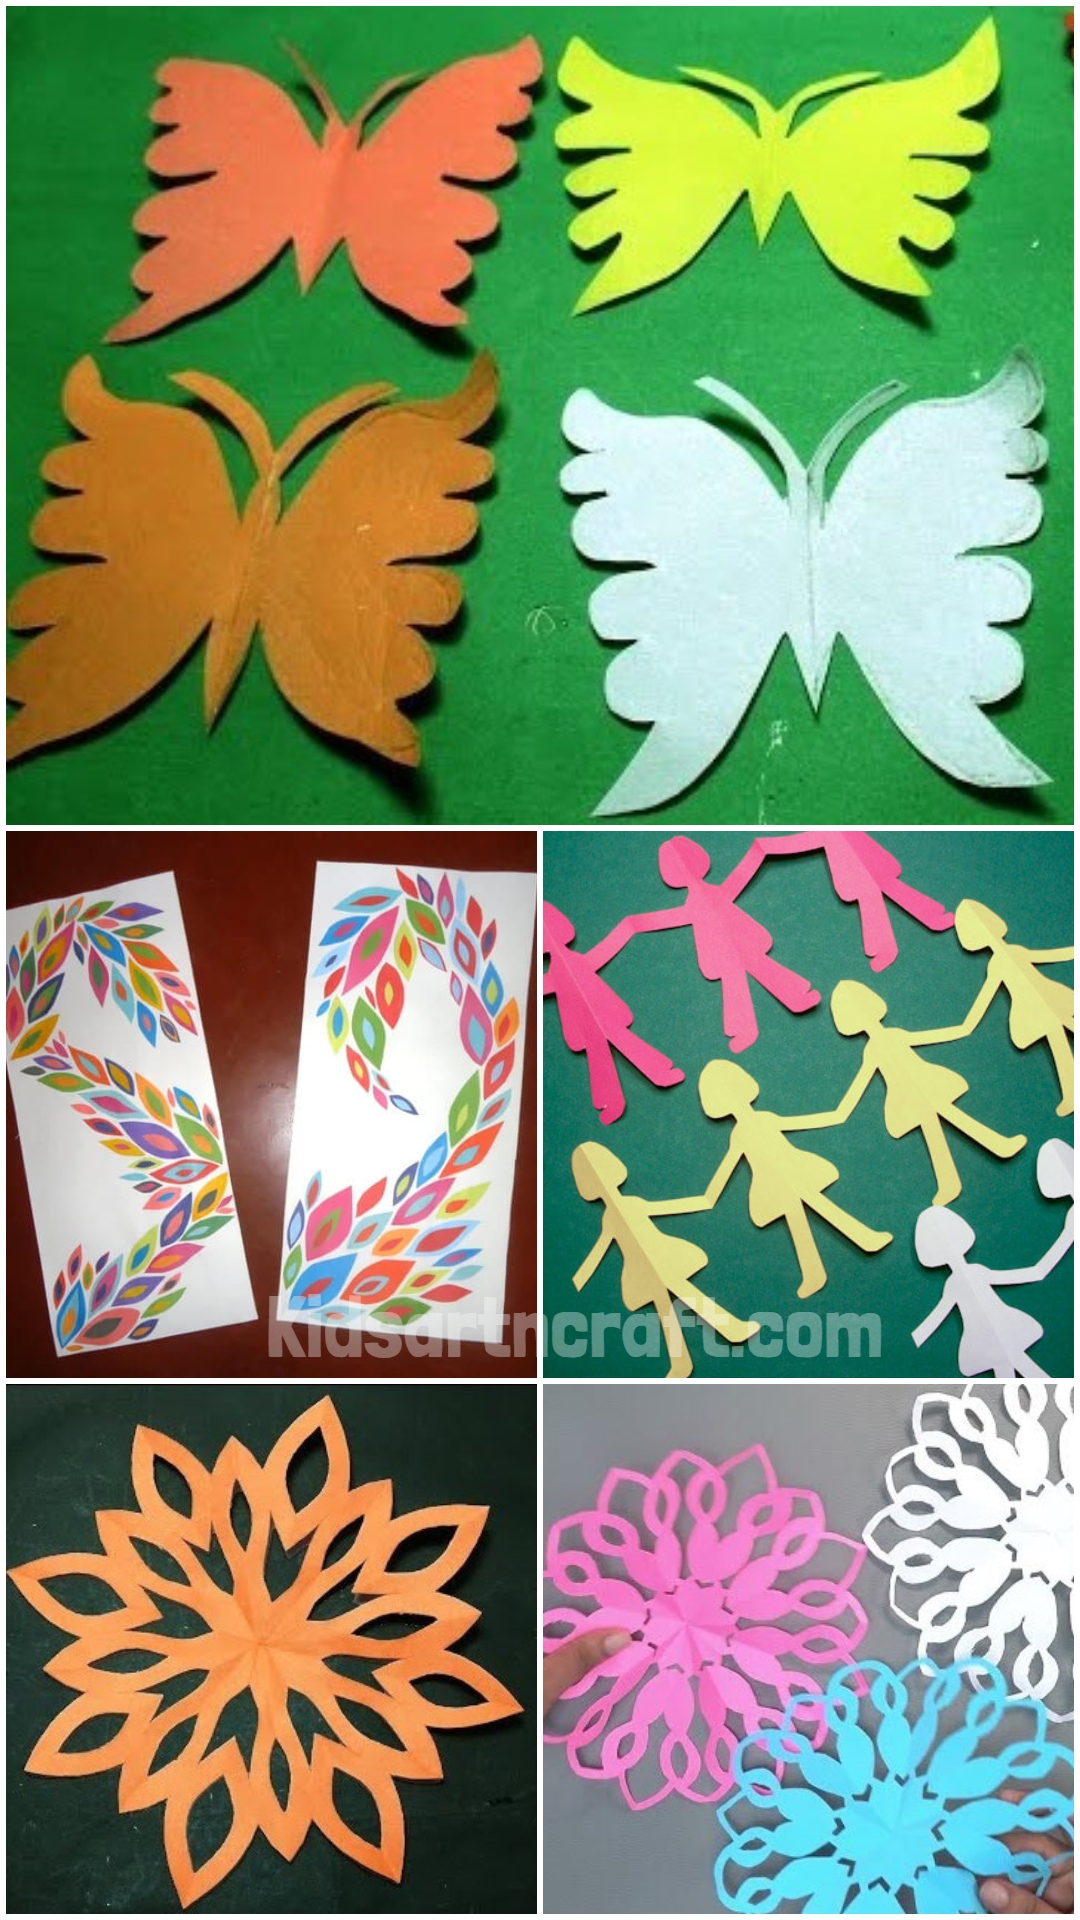 Paper-Cutting Designs For Projects